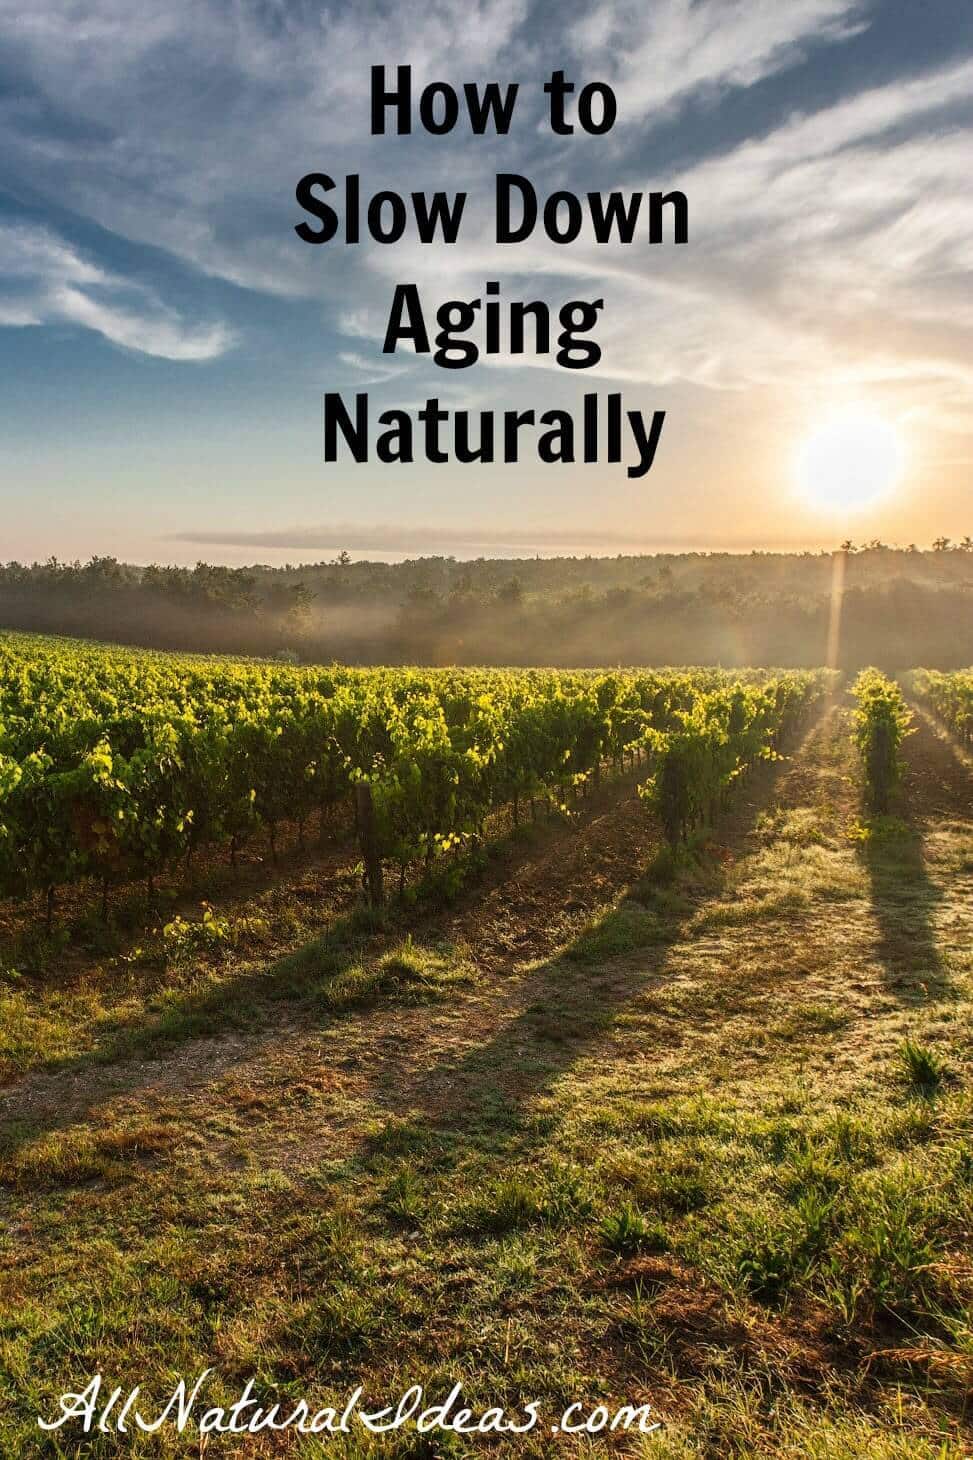 Slow down aging naturally